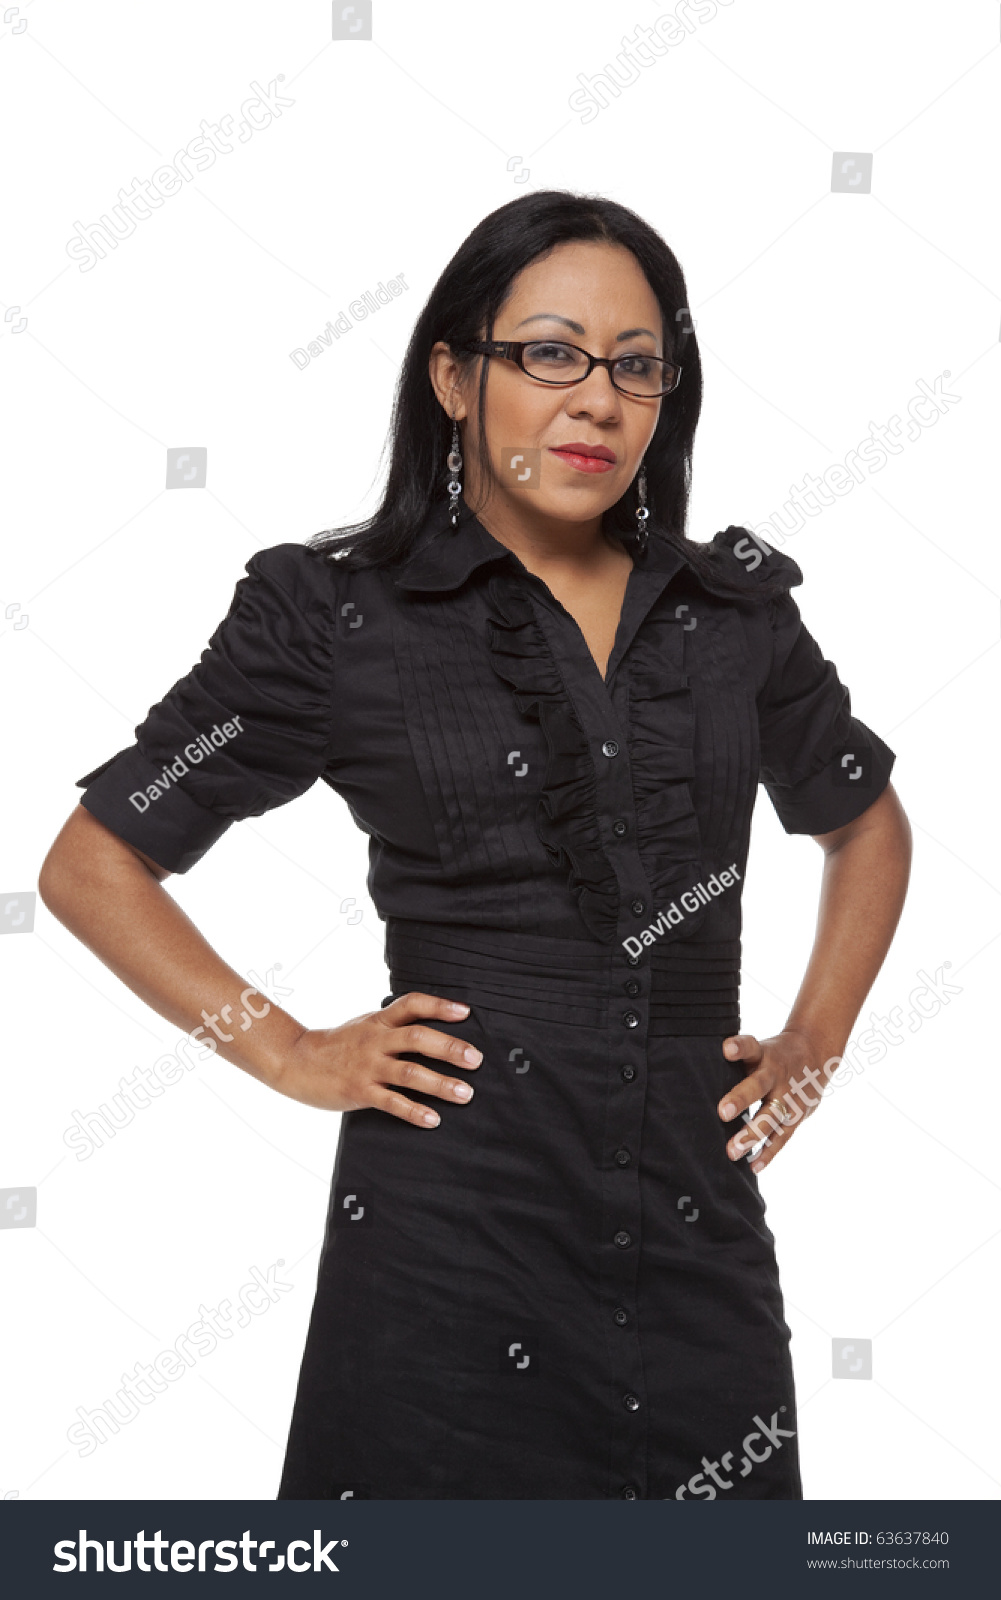 Isolated Studio Shot Of A Latina Businesswoman With A Stern Expression ...